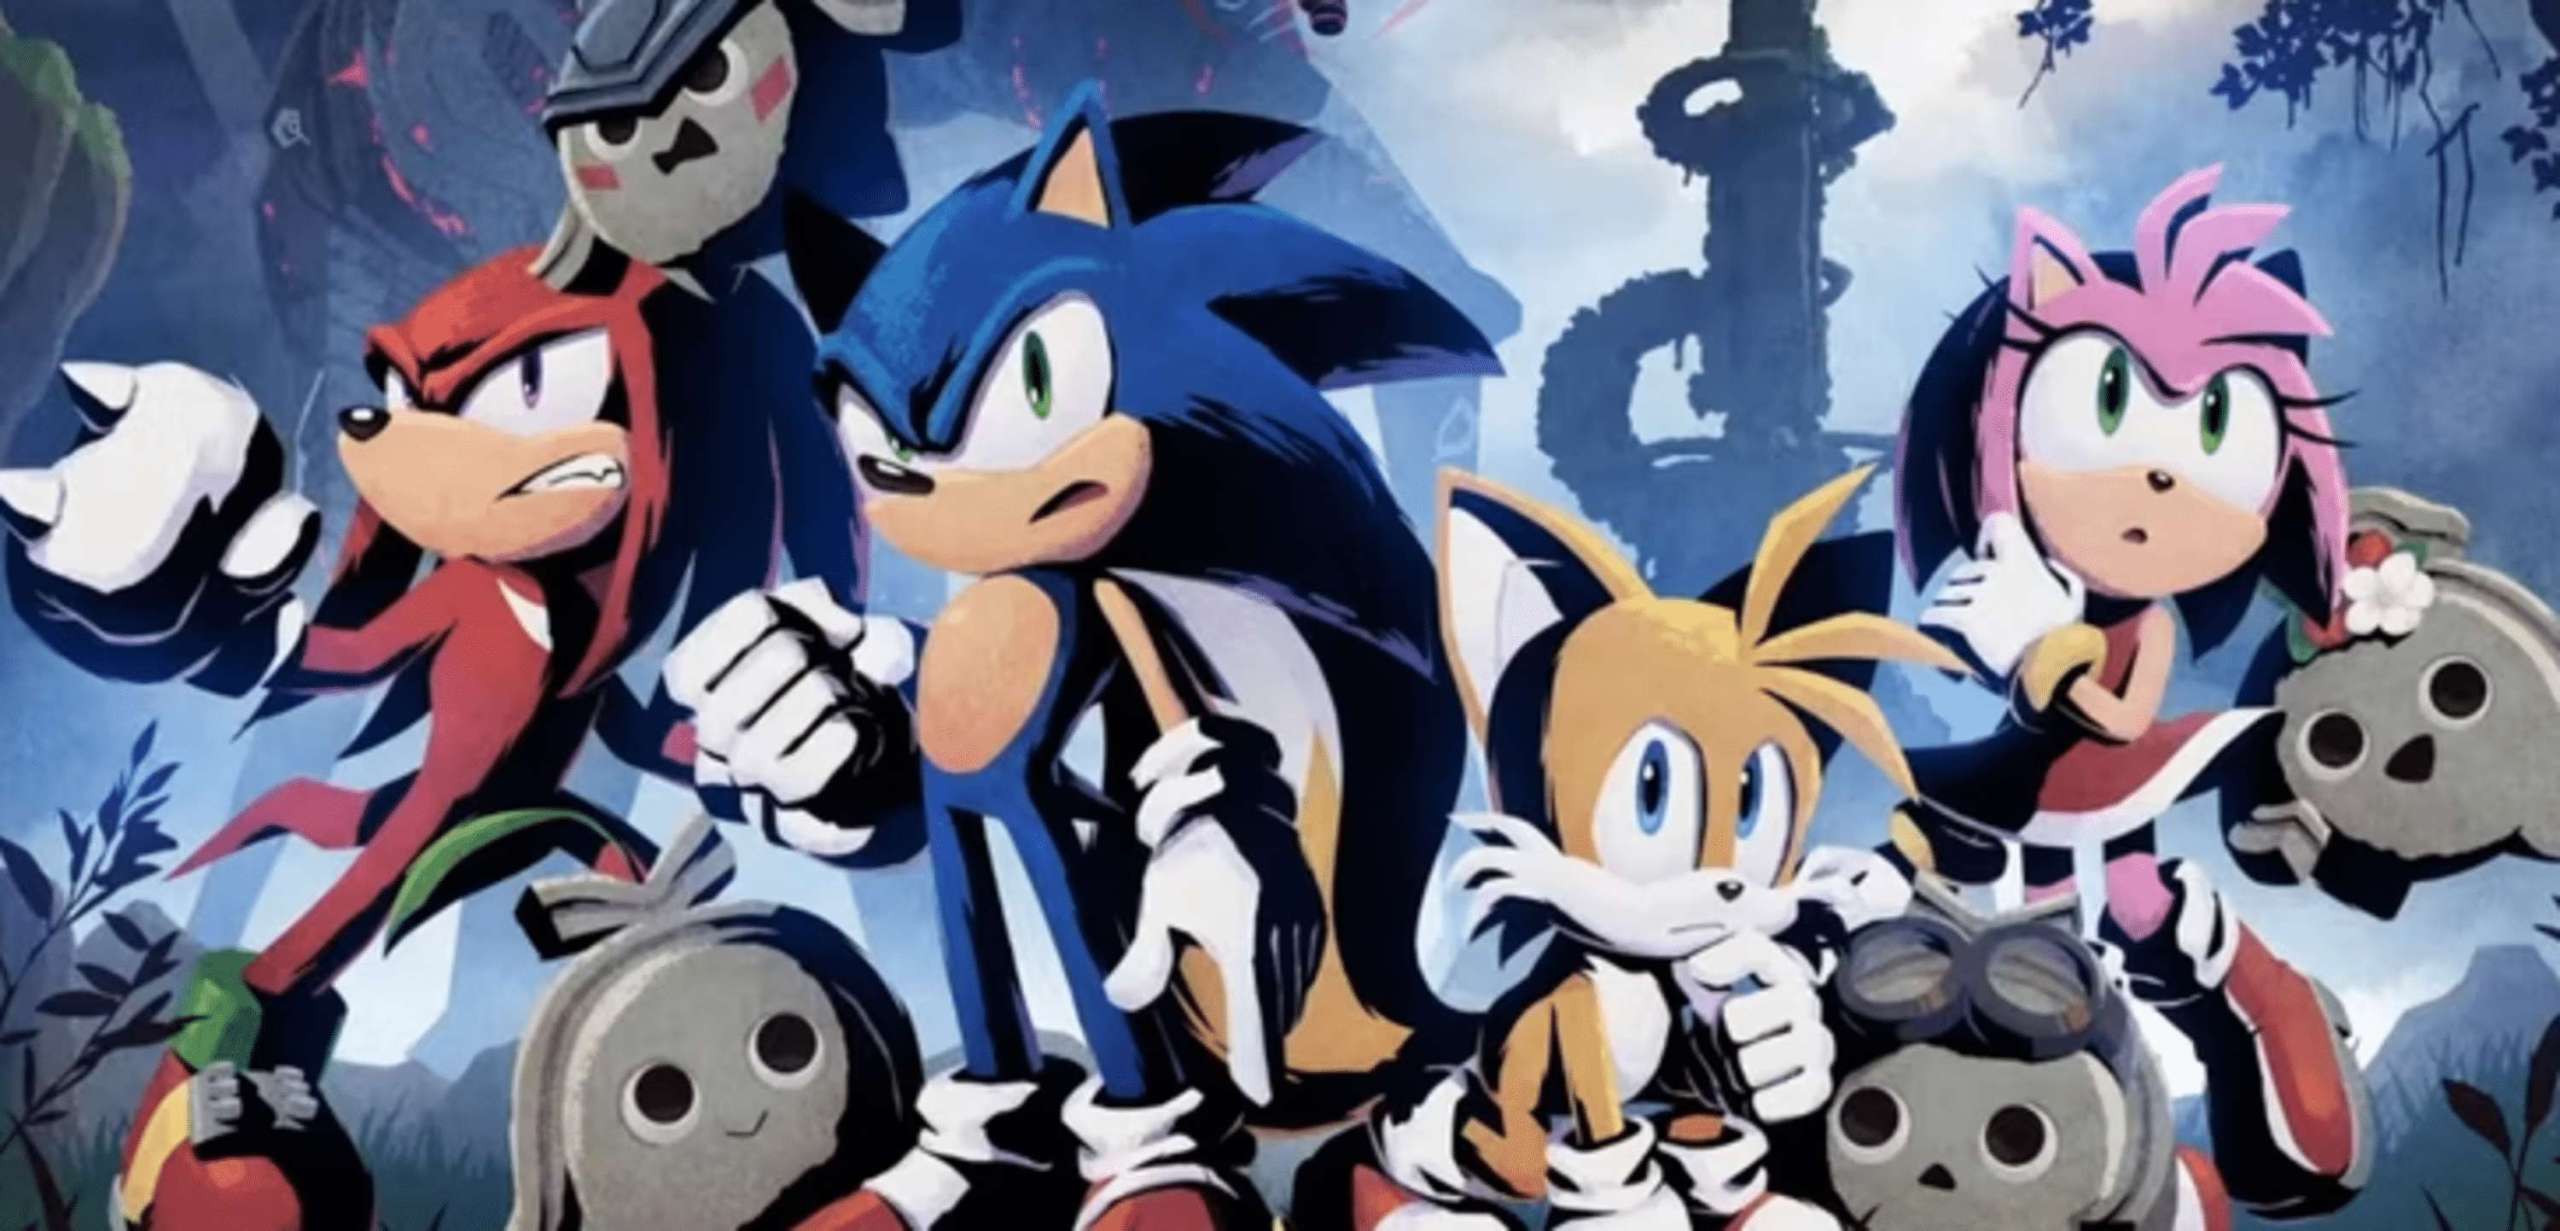 Knuckles’s New Pets Are Confirmed In The Latest Sonic Frontiers Artwork